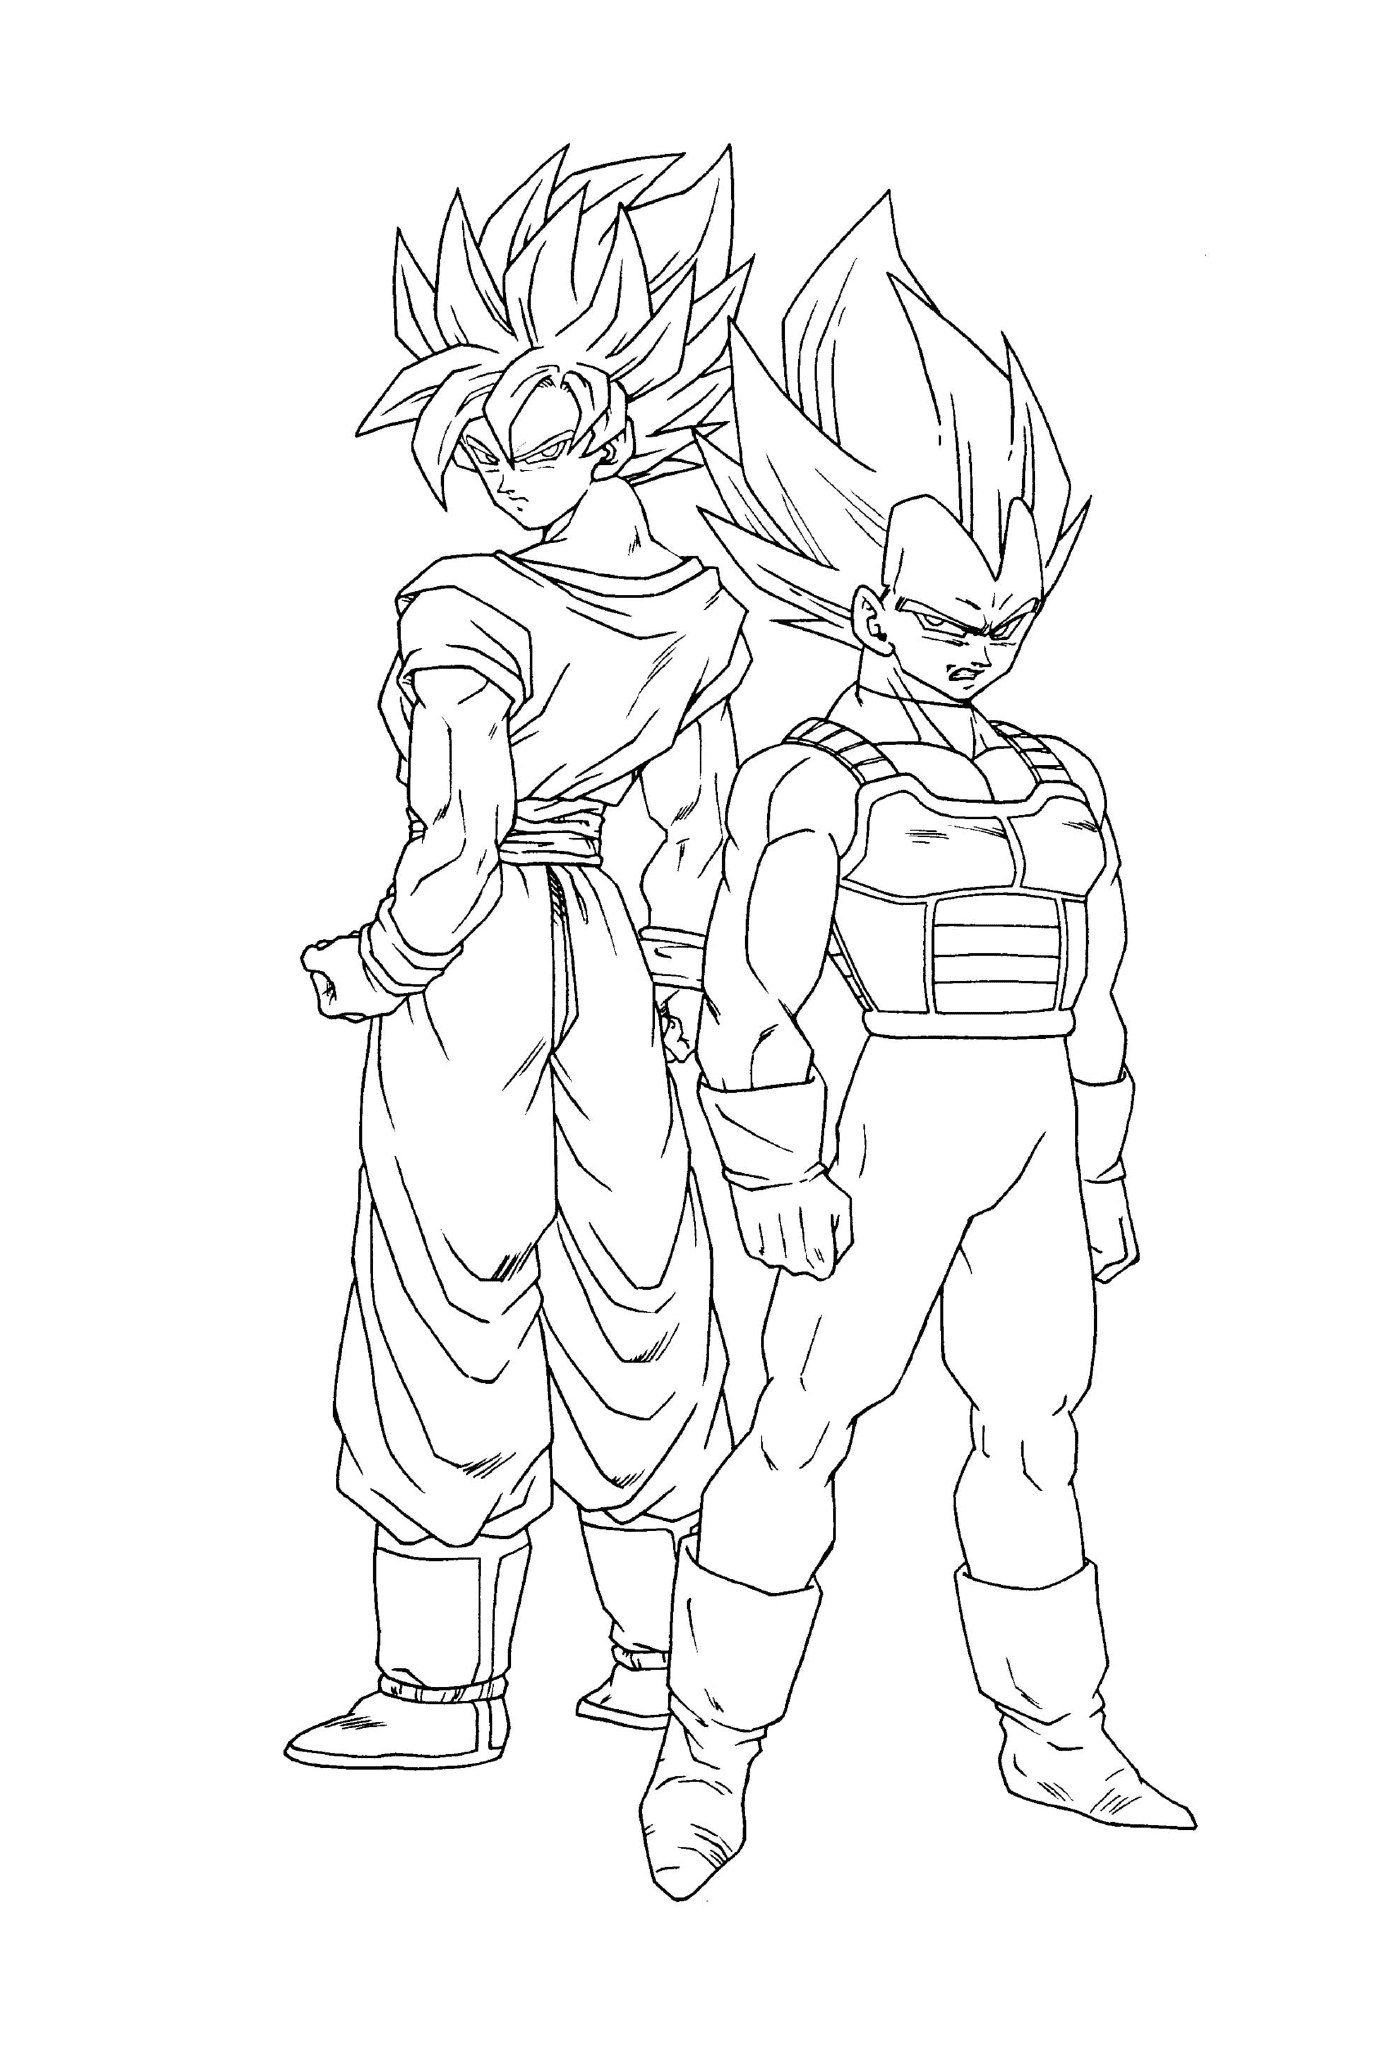  Goku and his brother Vegeta from Dragon Ball Z 